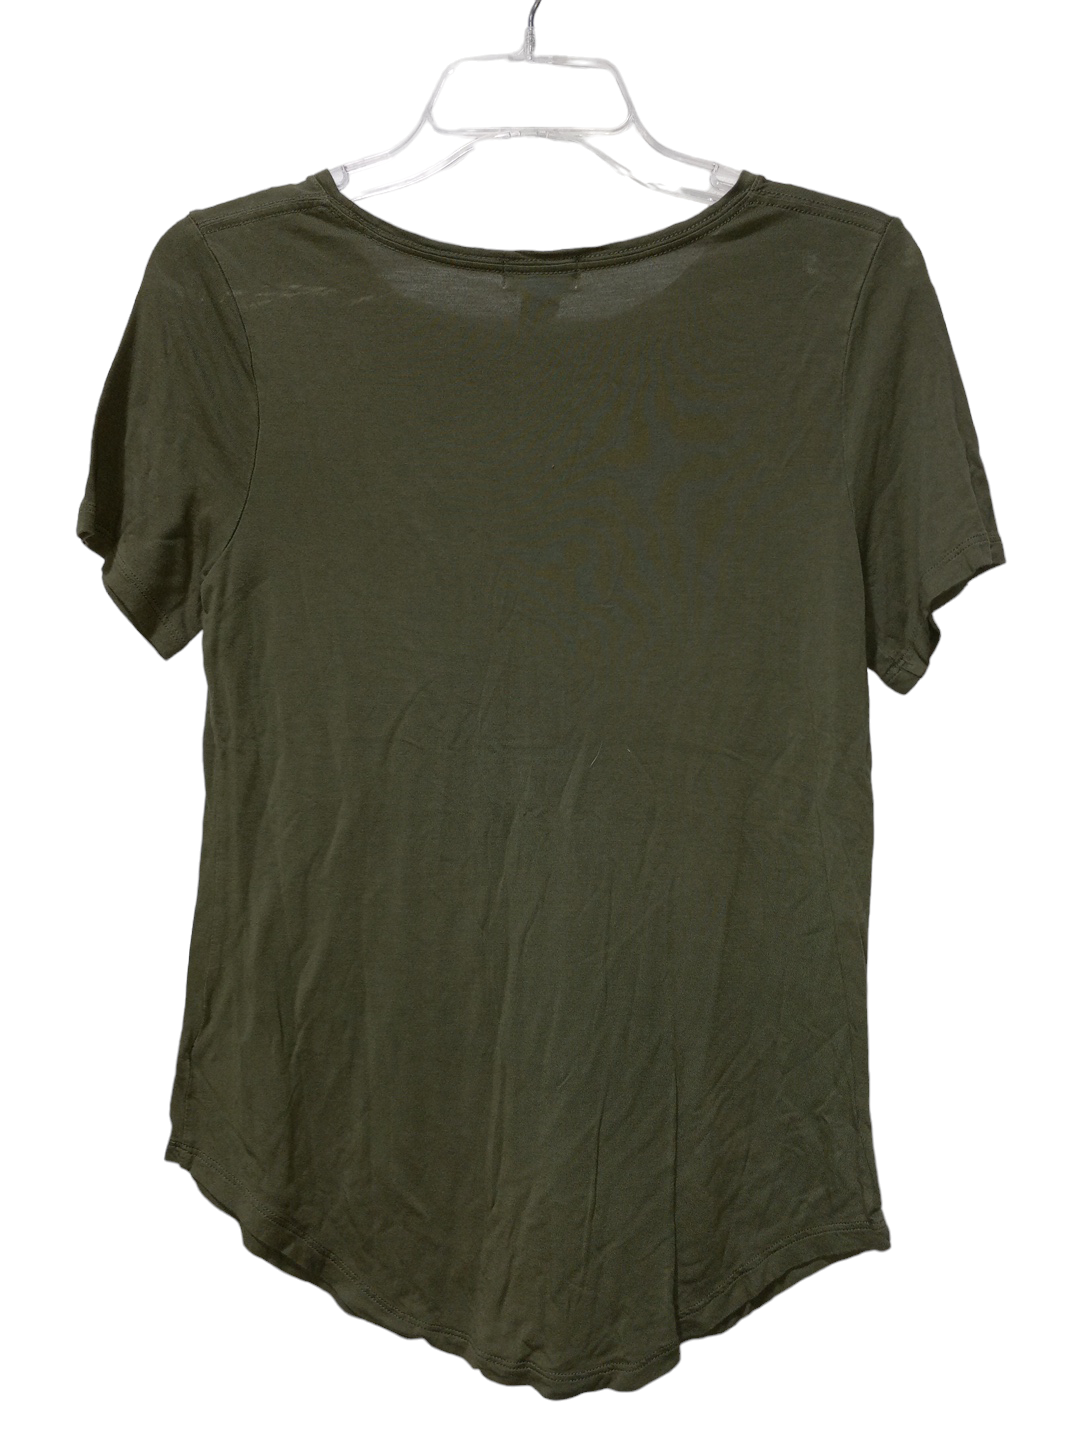 Green Top Short Sleeve Old Navy, Size S